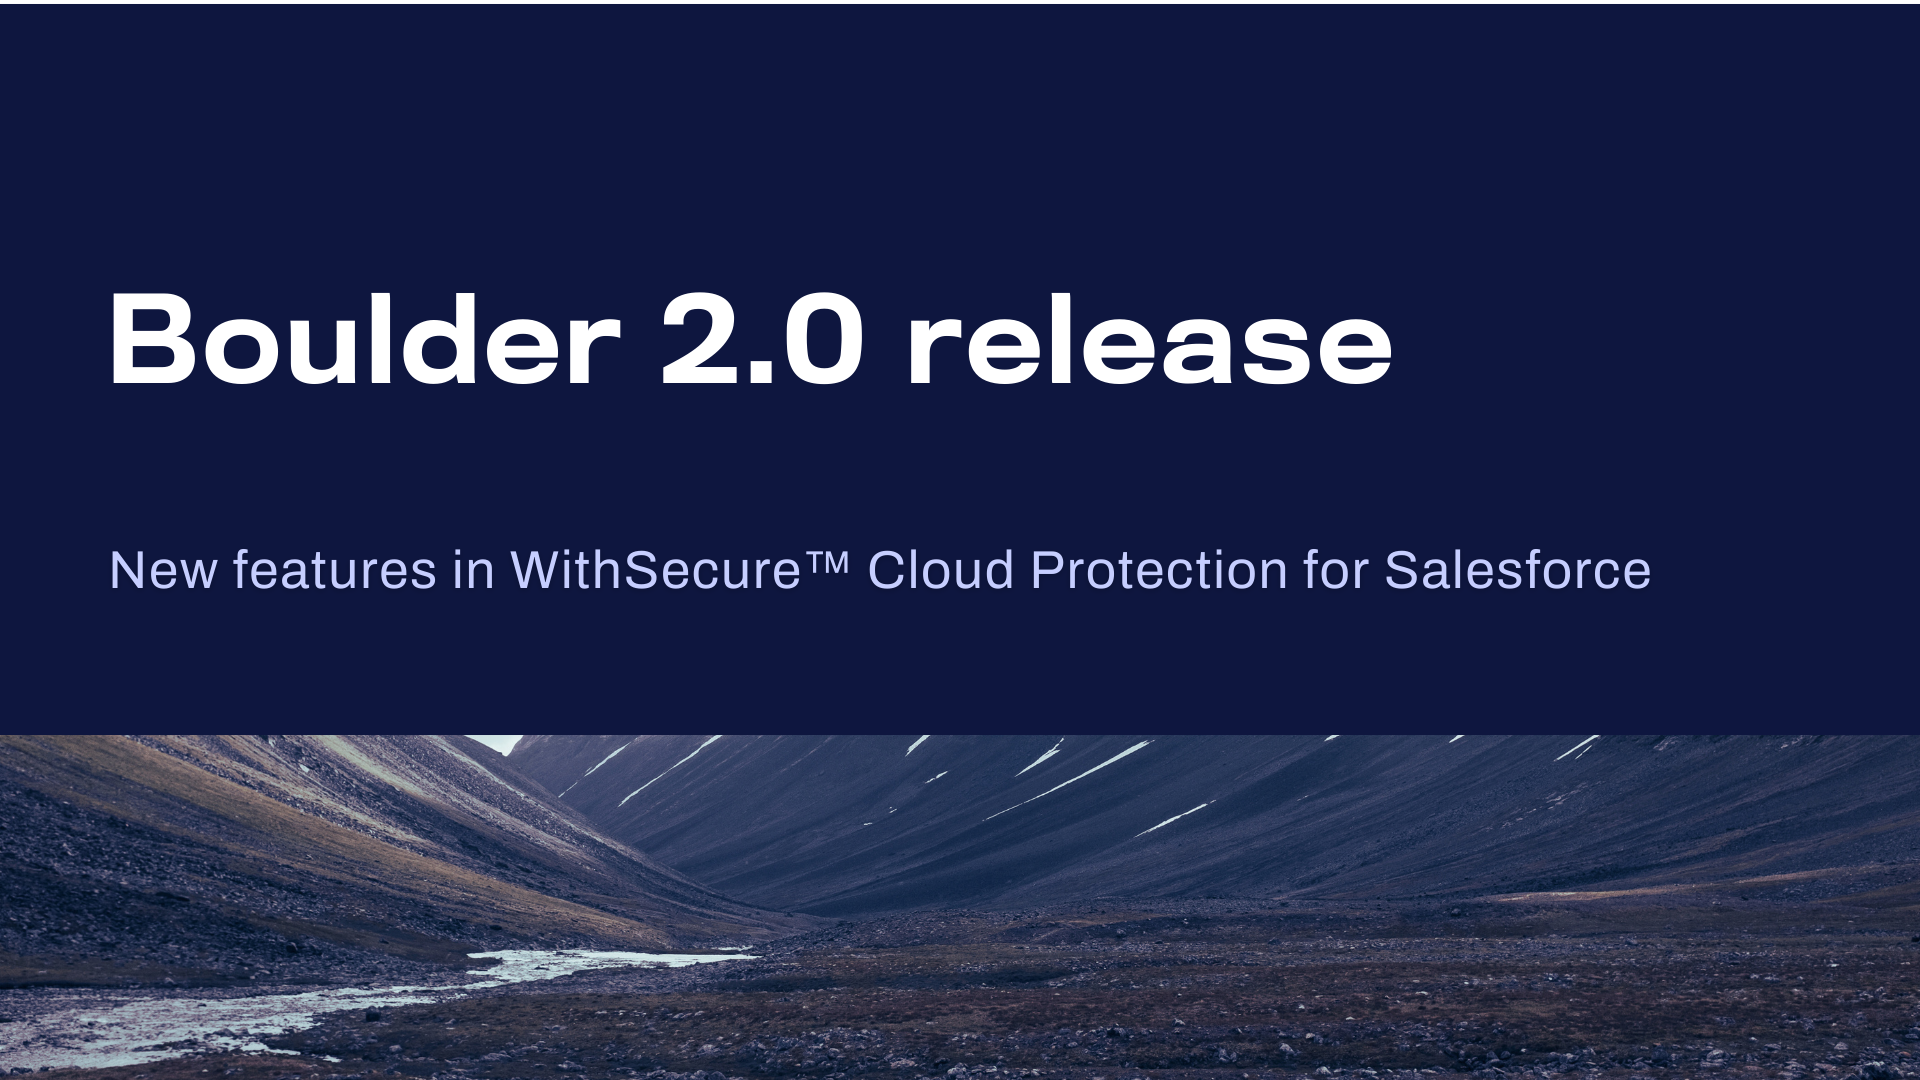 What’s new in WithSecure™ Cloud Protection for Salesforce 2.0